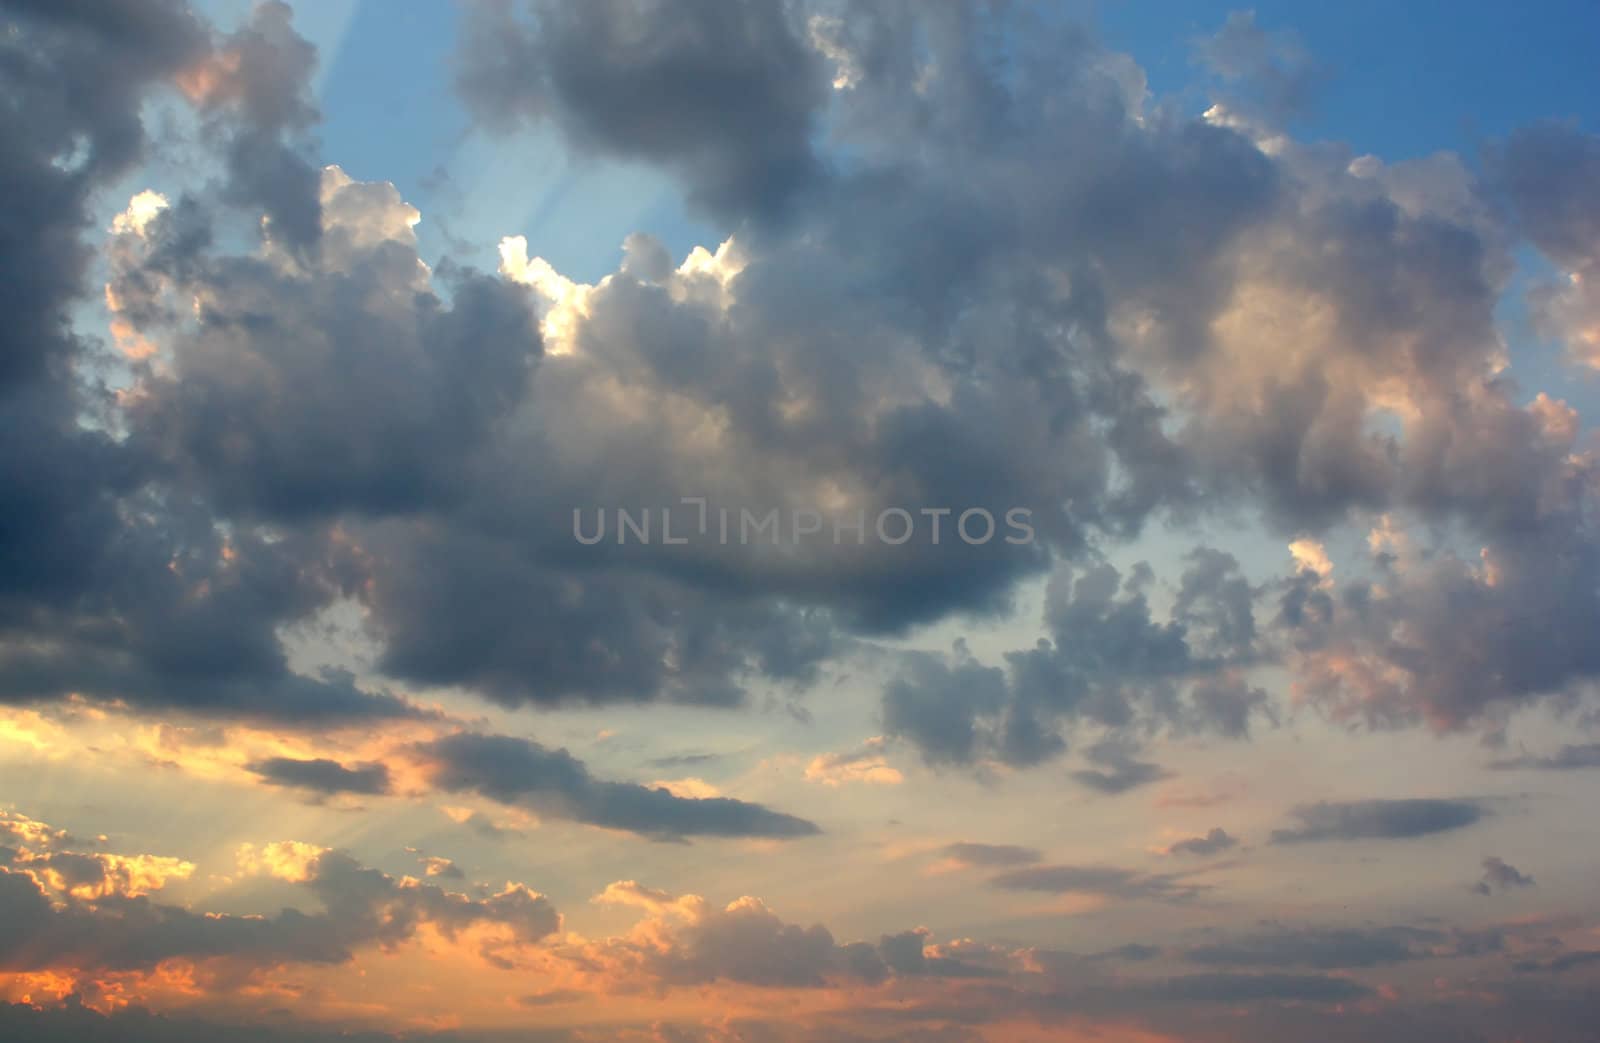 Evening sky with clouds by sergpet